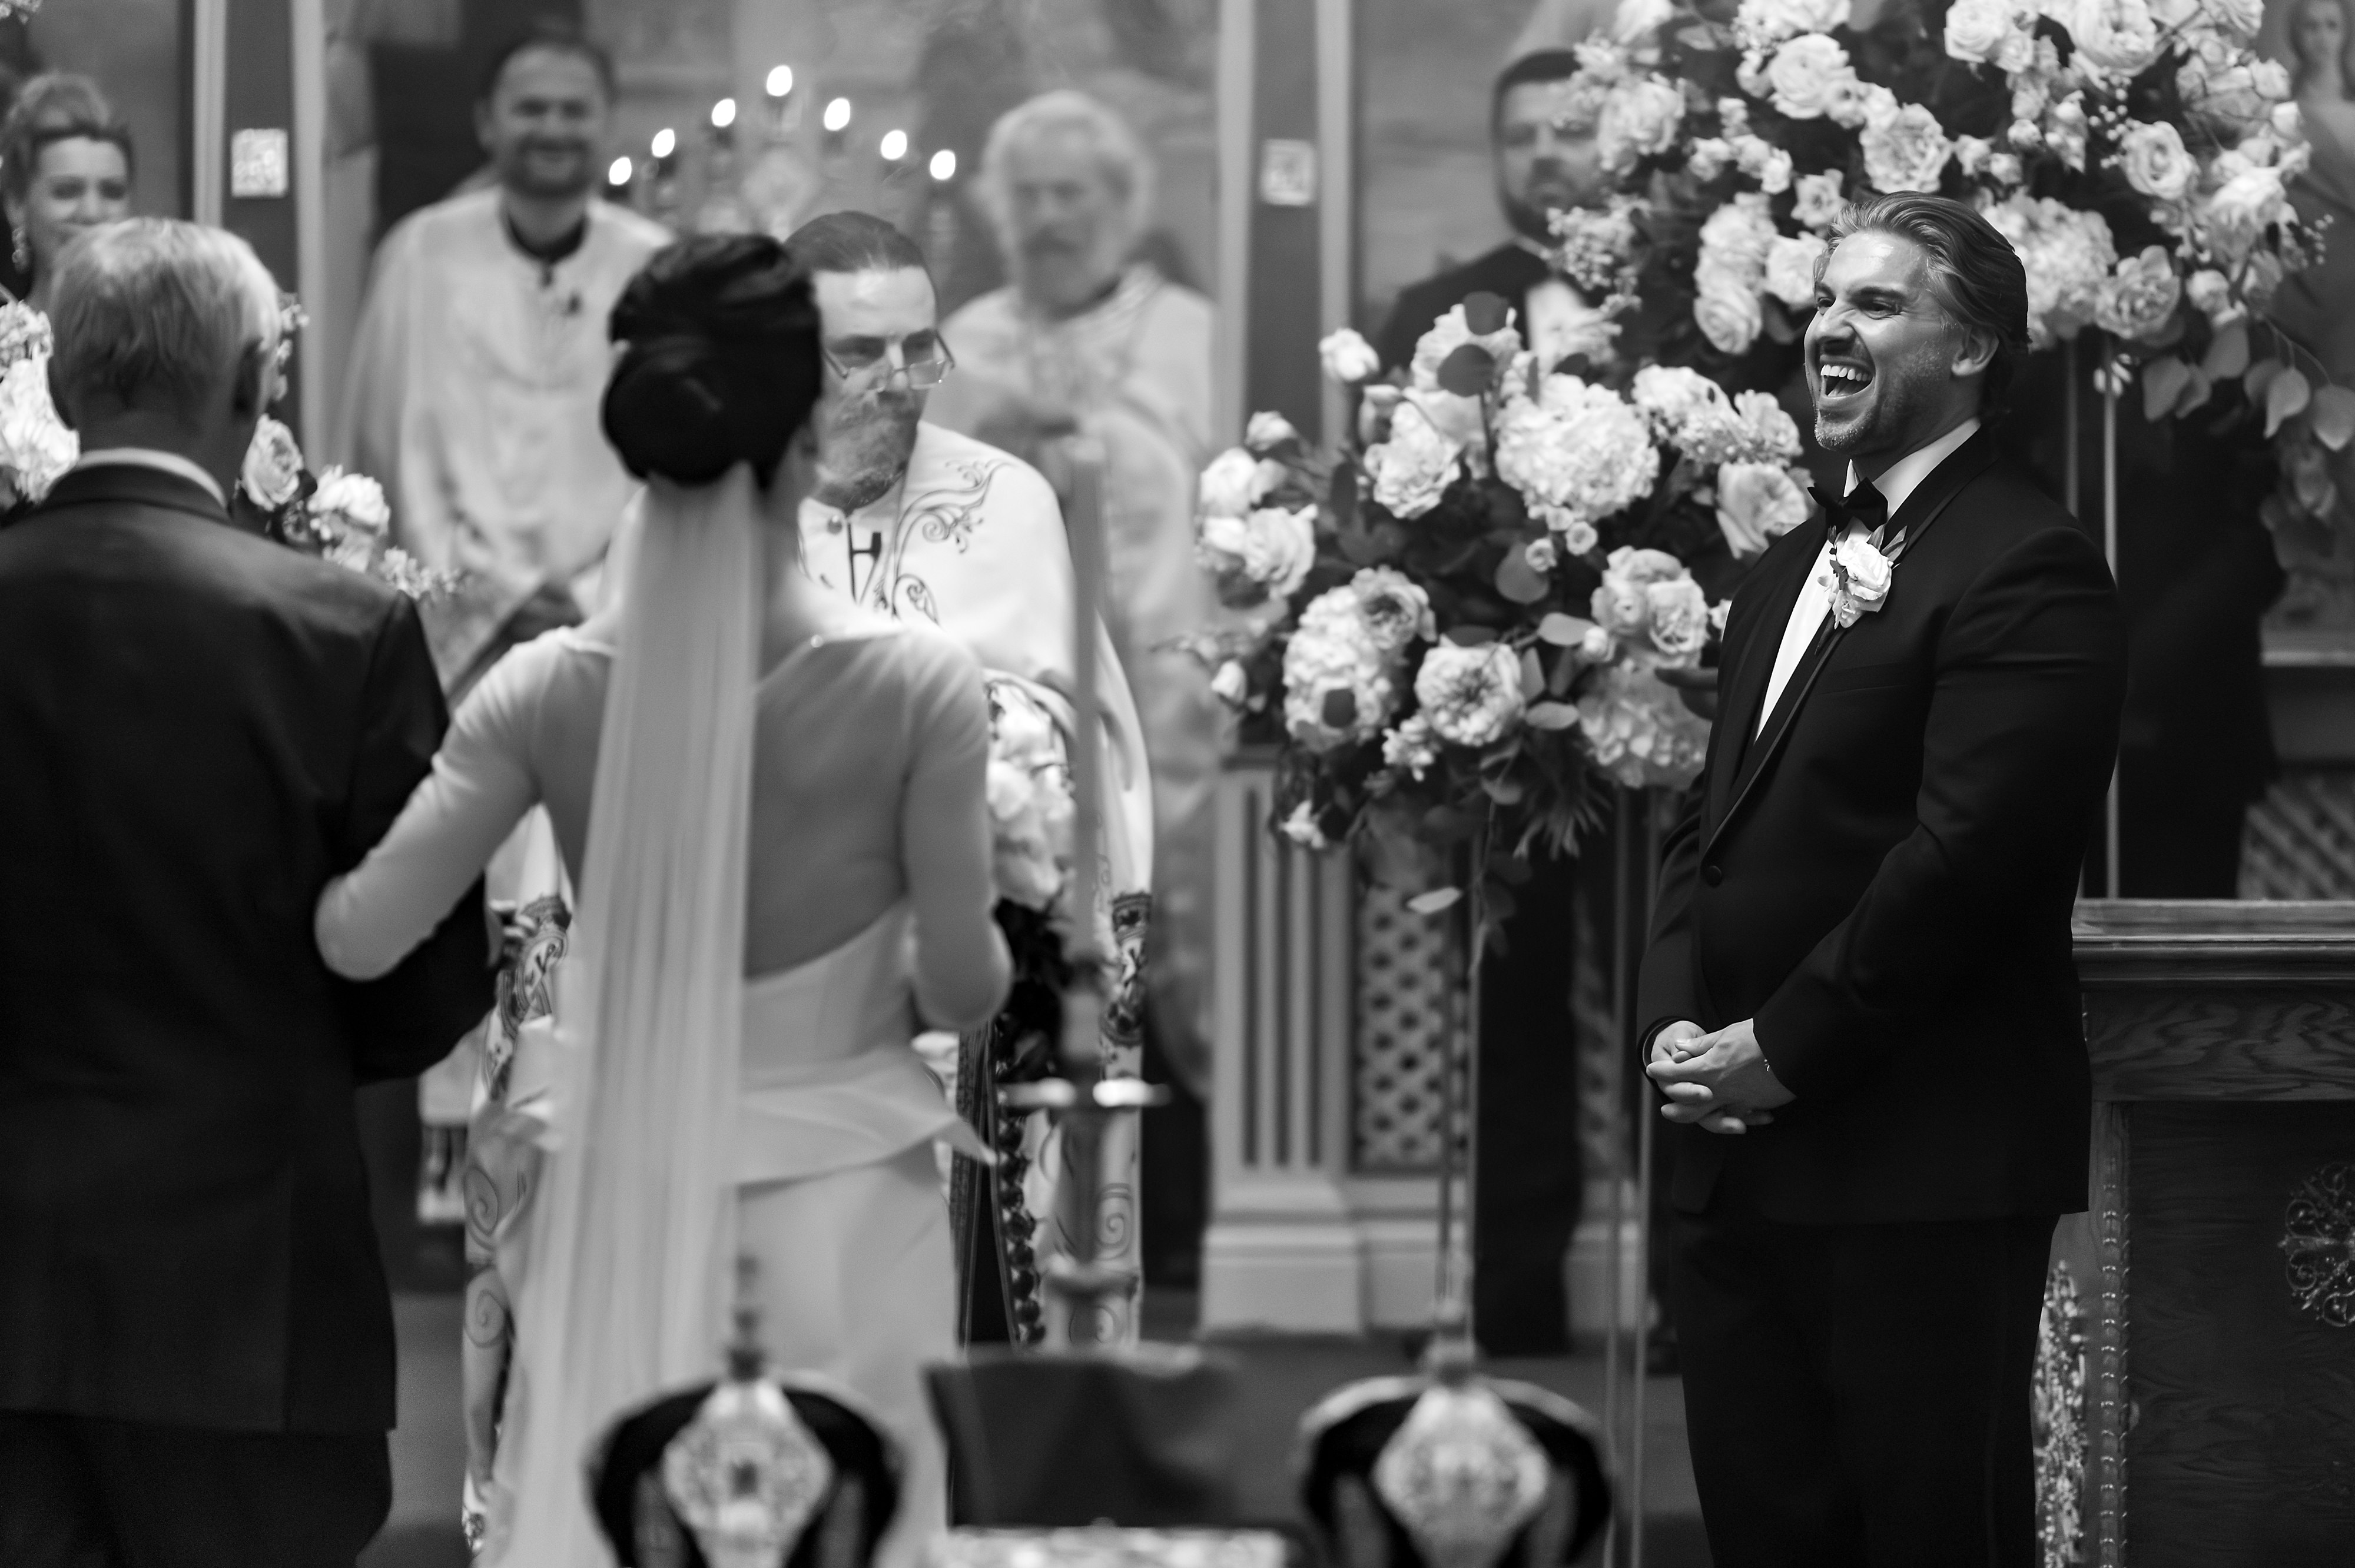 Bride walks down aisle with father during Serbian Orthodox Wedding at St. George church in East Chicago Indiana